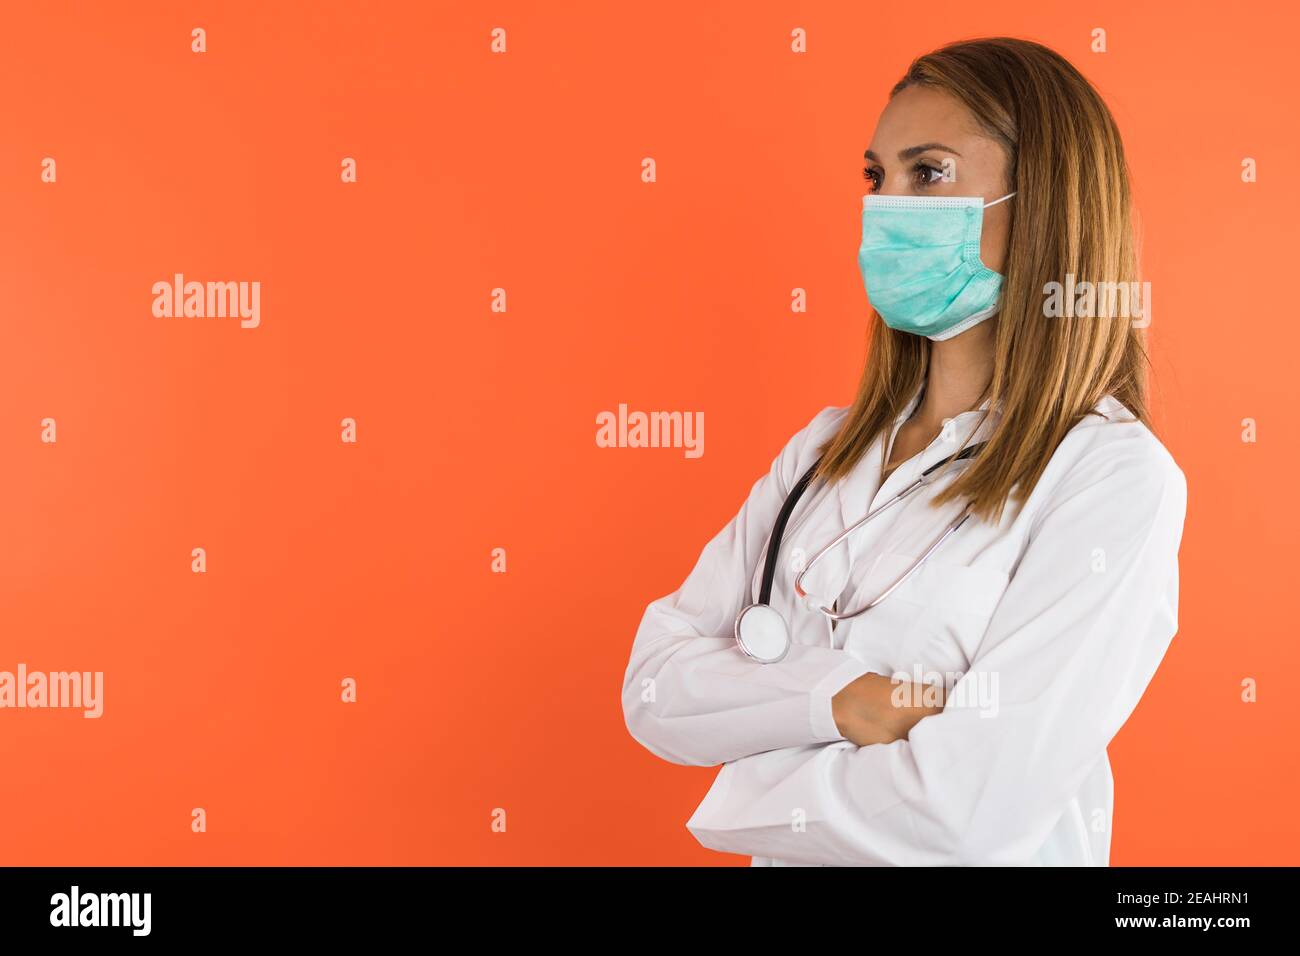 Profile of woman doctor with facemask looking on the side with copyspace Stock Photo